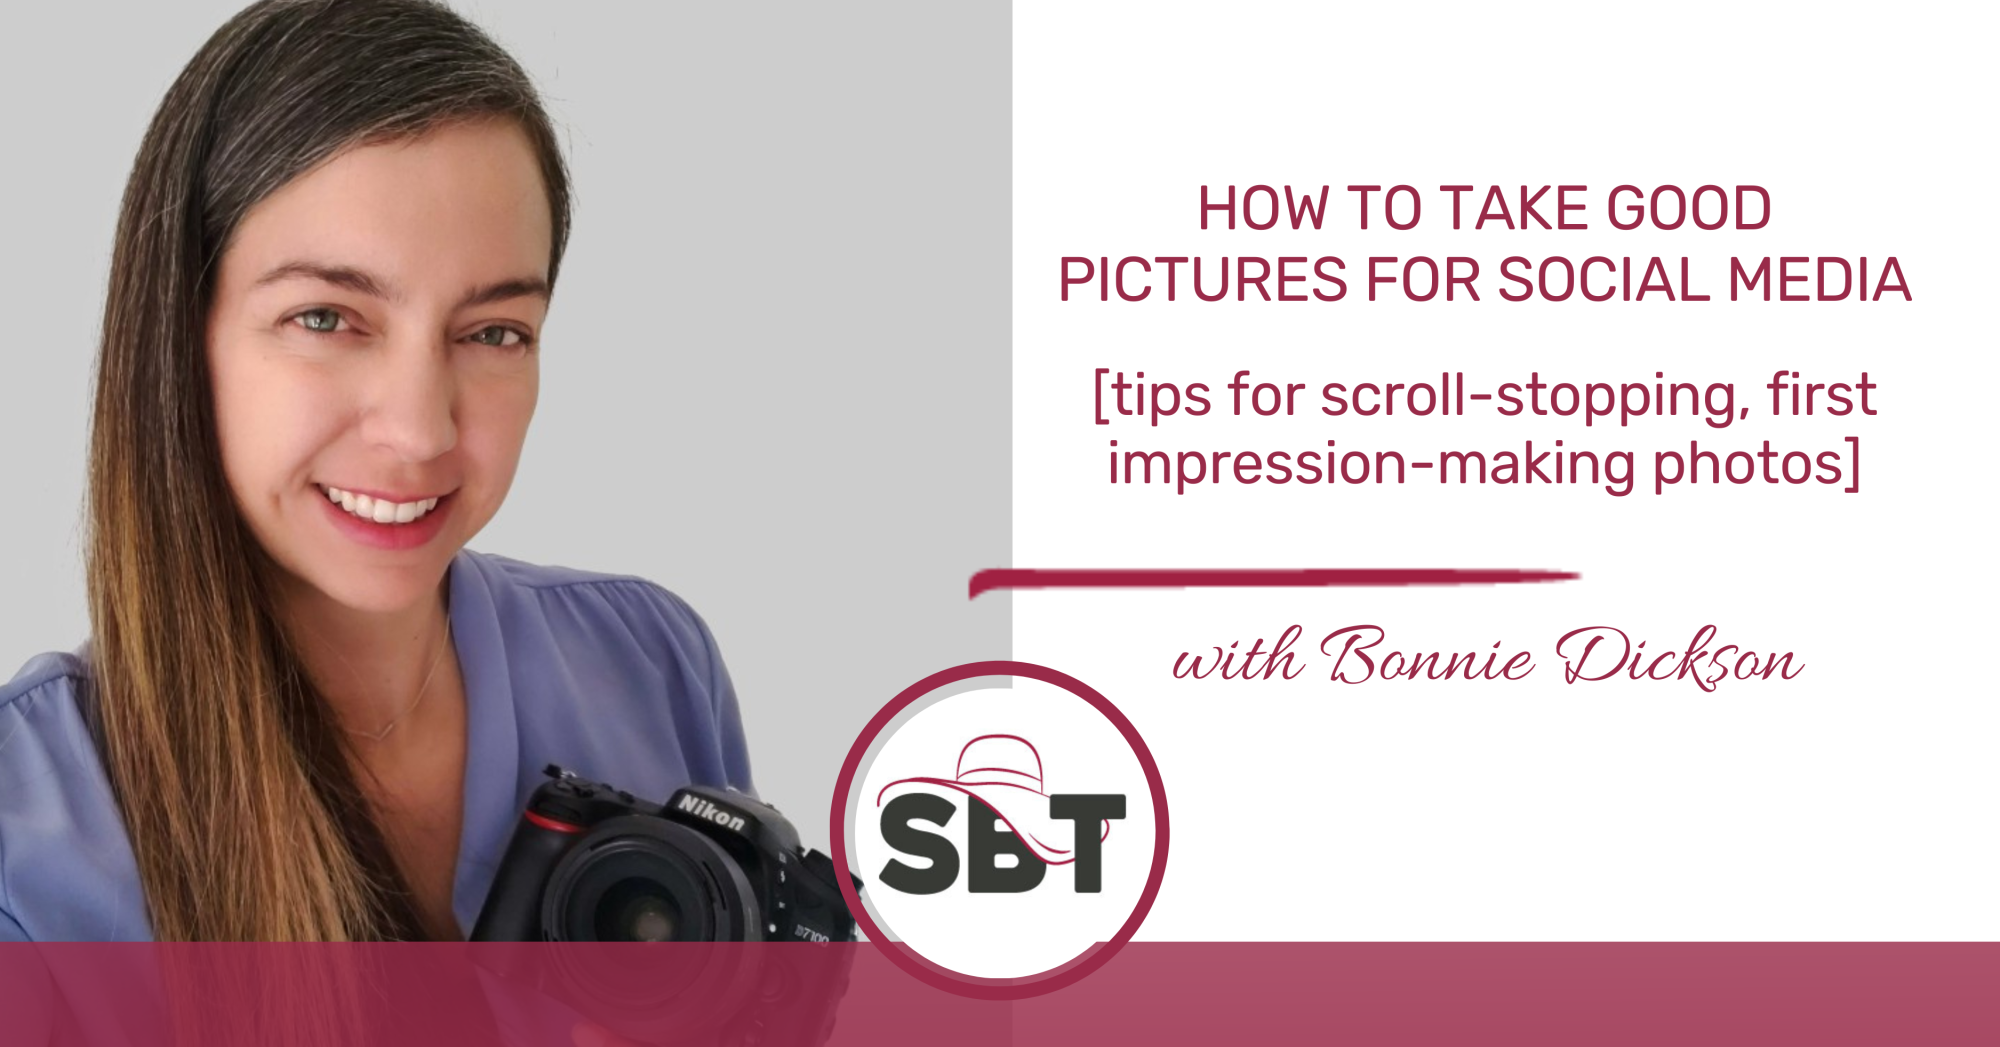 How to Take Better Pictures for Social Media with She Built This